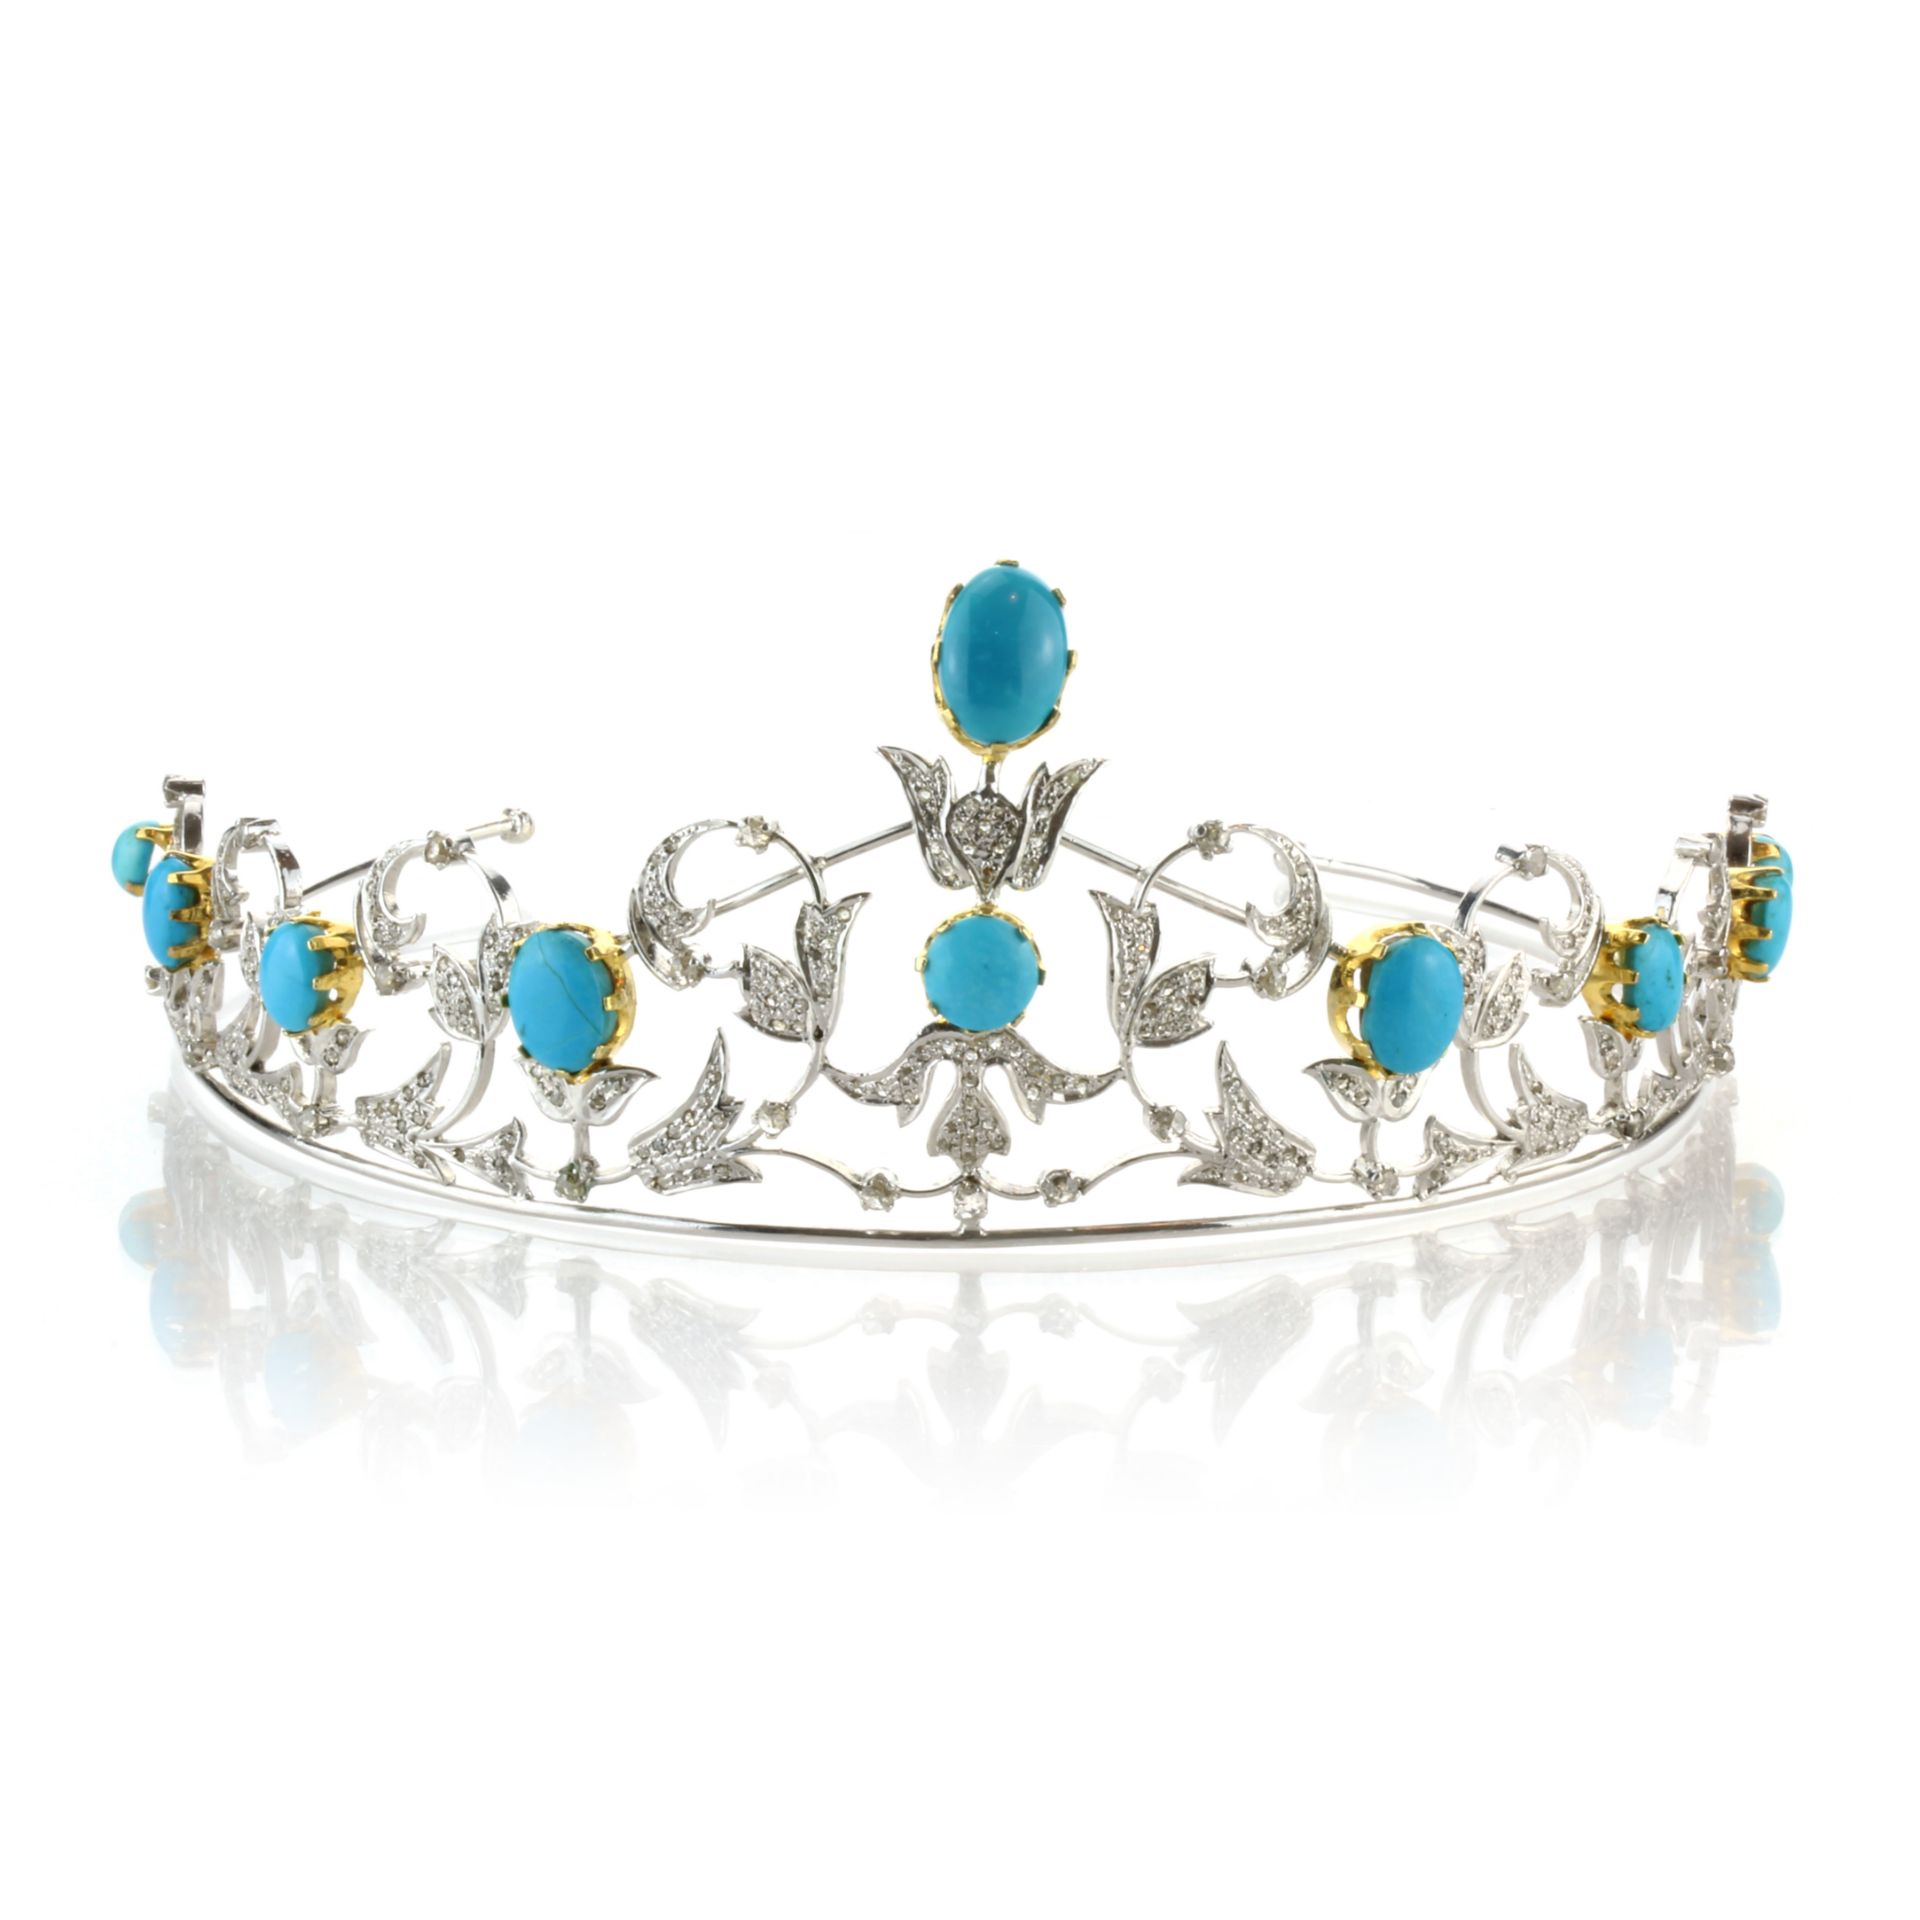 A TURQUOISE AND DIAMOND TIARA in yellow and white metal set with ten large turquoise cabochons